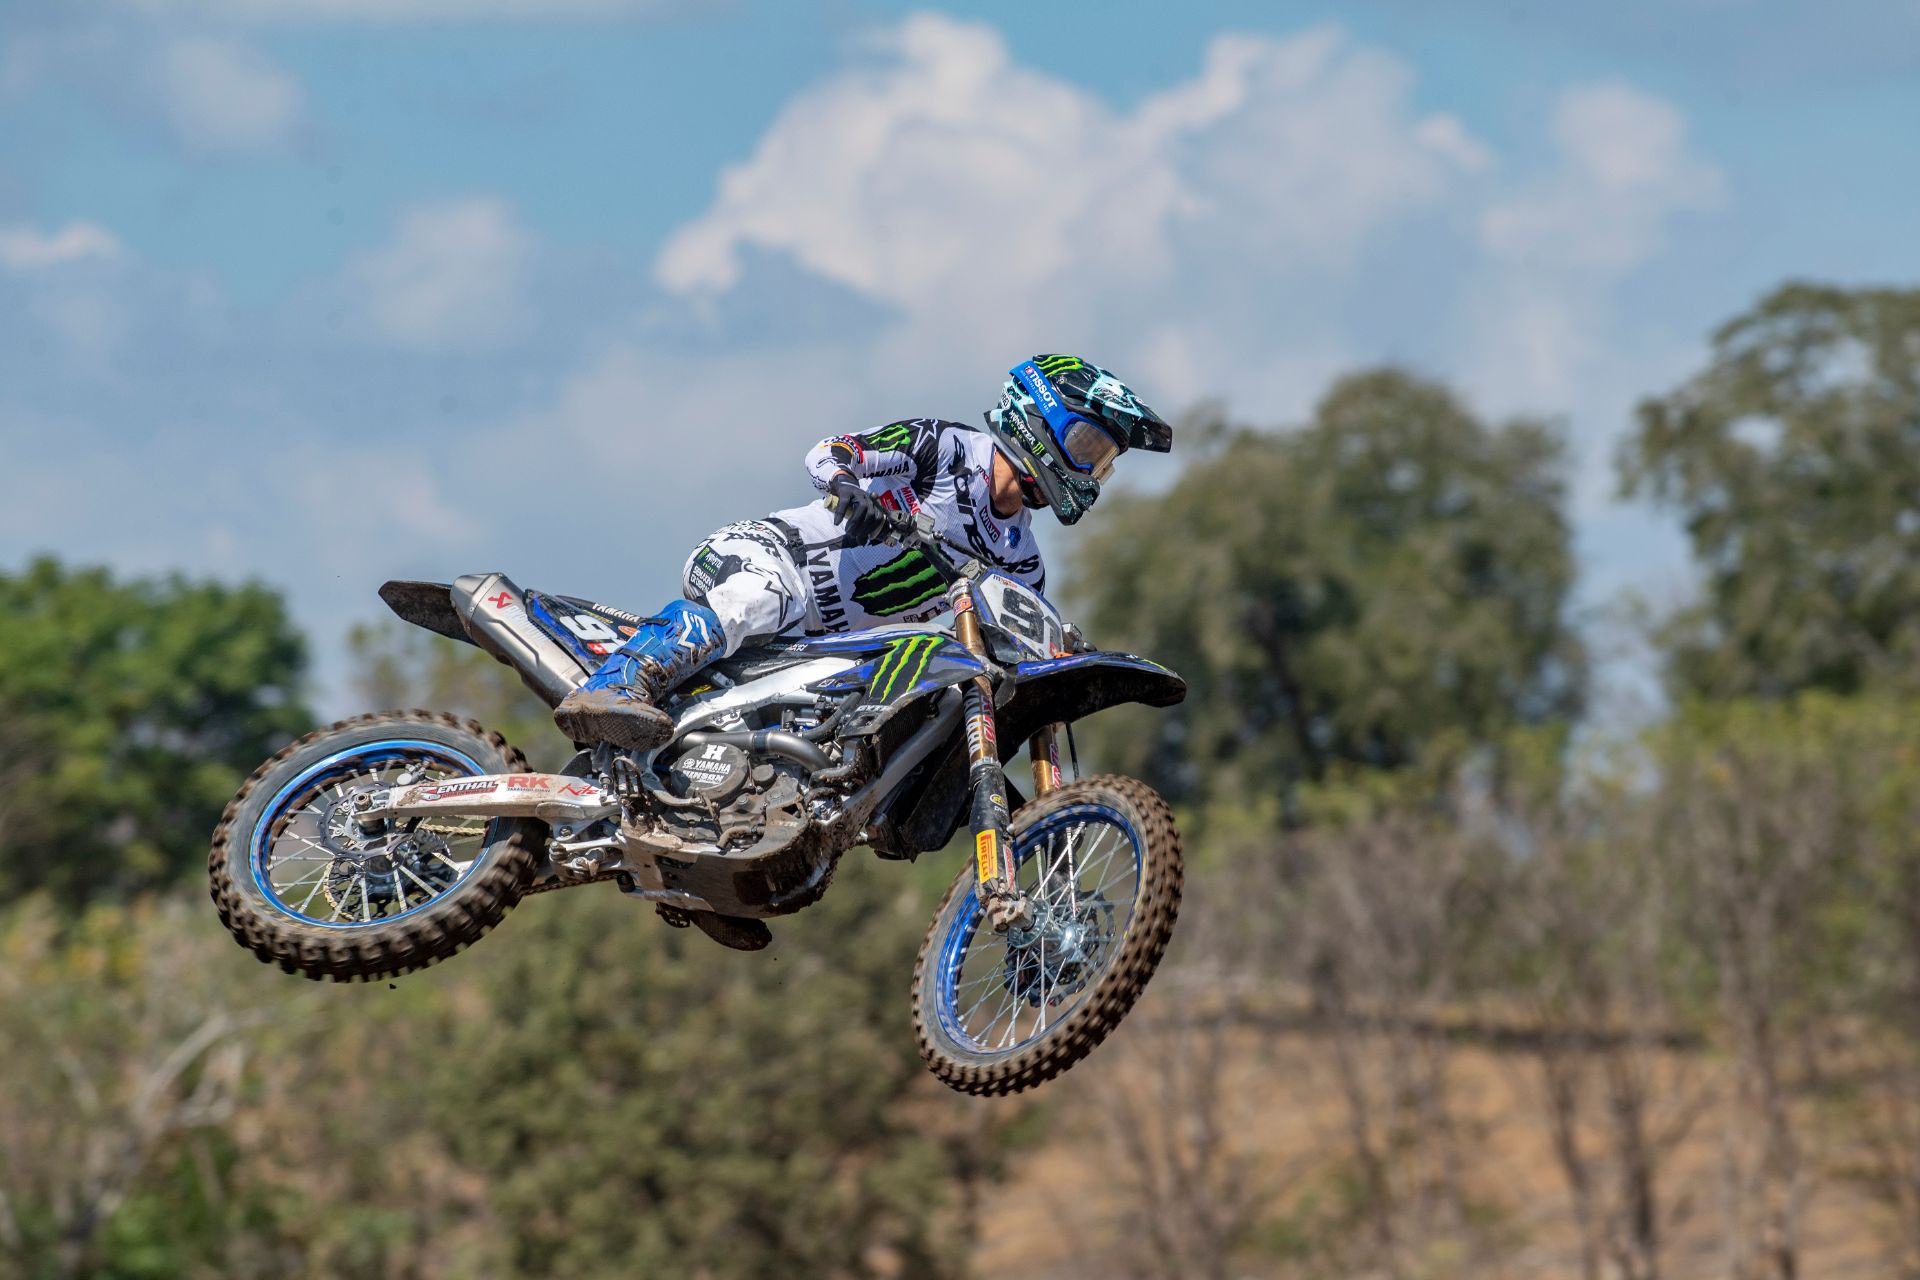 Seewer & Coldenhoff Shine in Sumbawa Qualifier as Benistant Inches Closer to MX2 Championship Lead